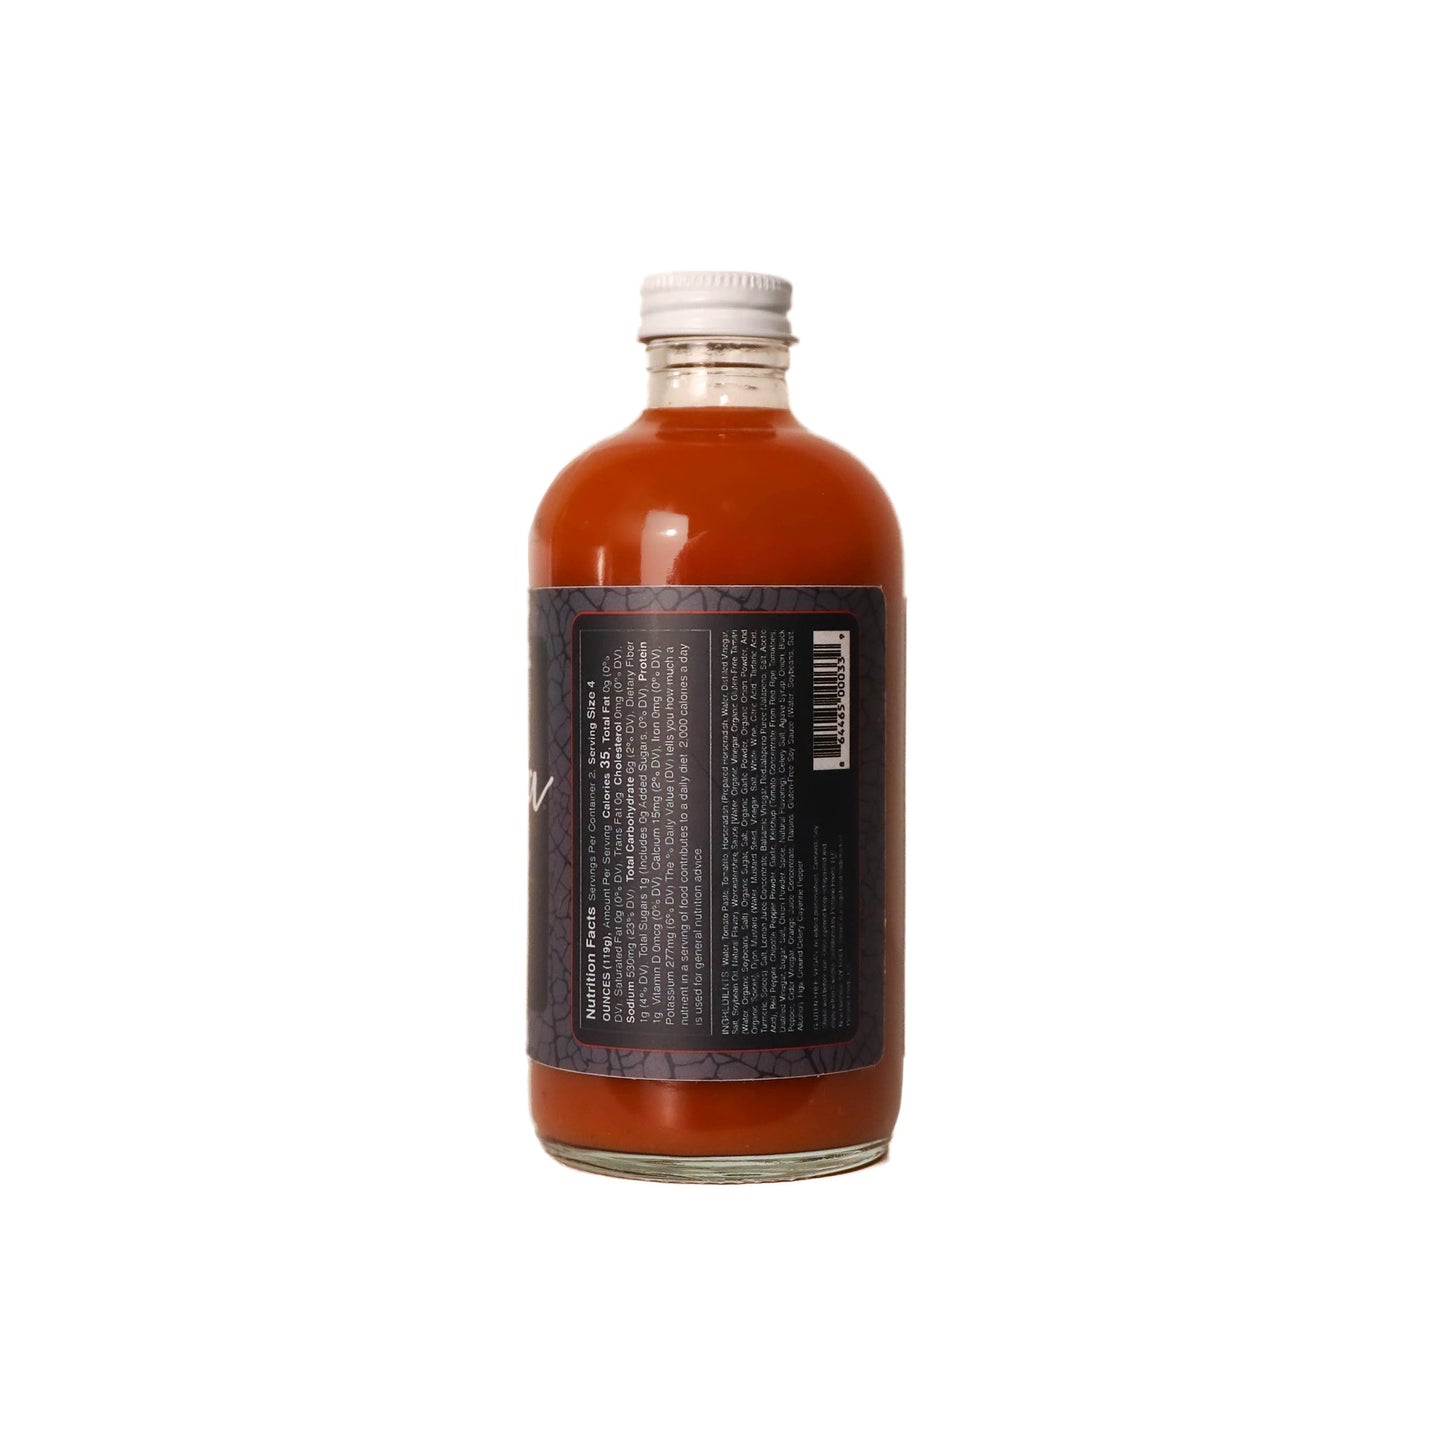 Toma Bloody Mary Mixer - Original (8oz) 4-PACK